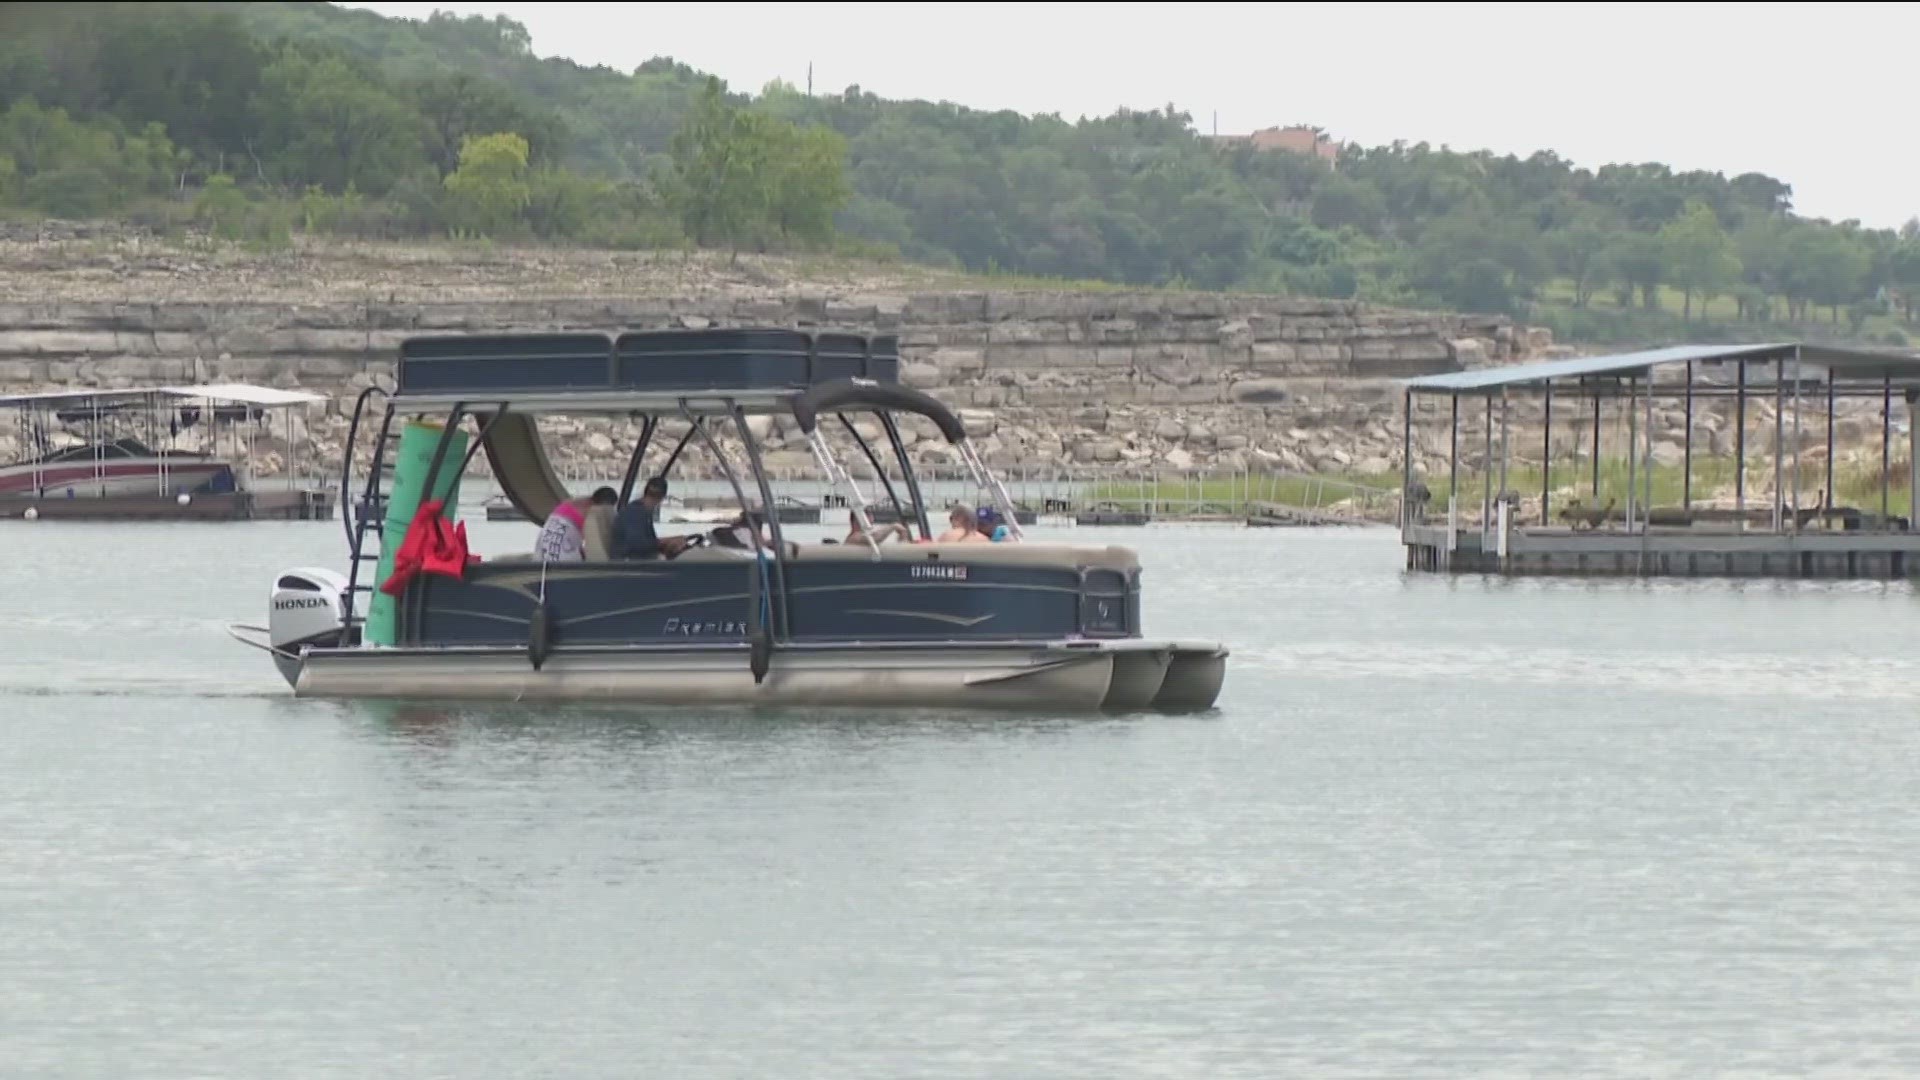 Despite the low lake levels, business owners are still expecting a busy Memorial Day Weekend.